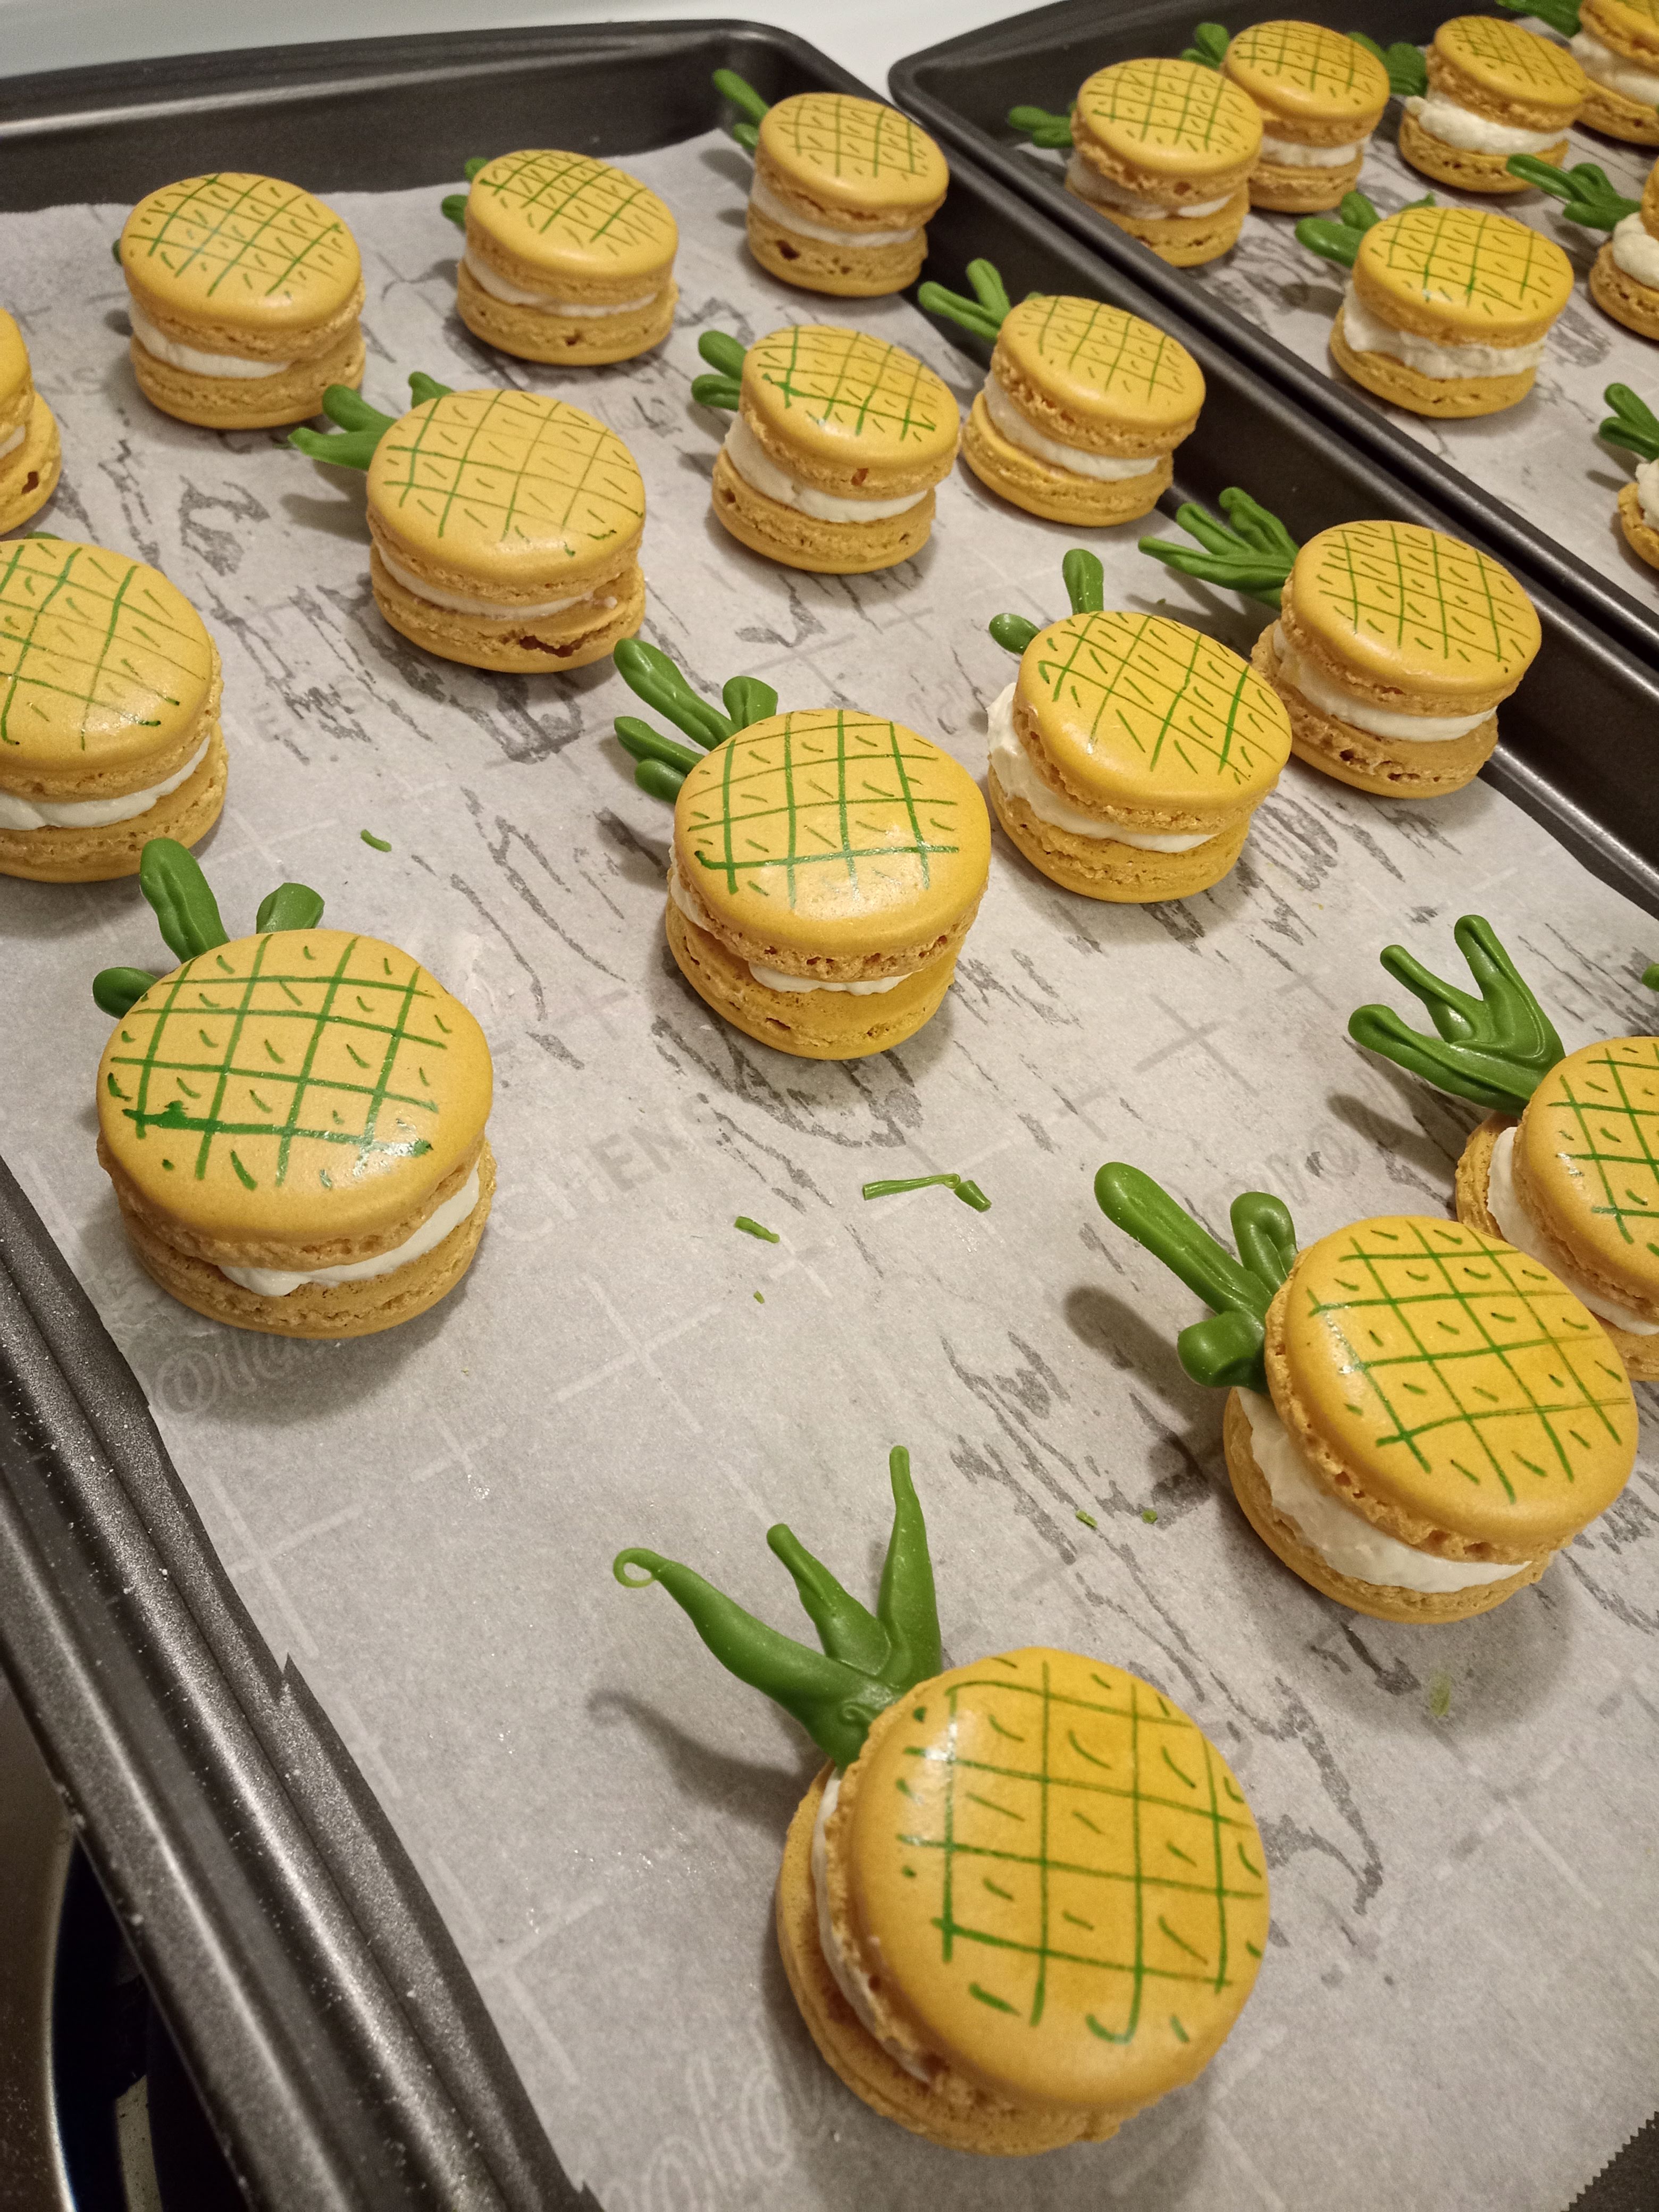 yellow macarons decorated with green white chocolate to look like pineapples